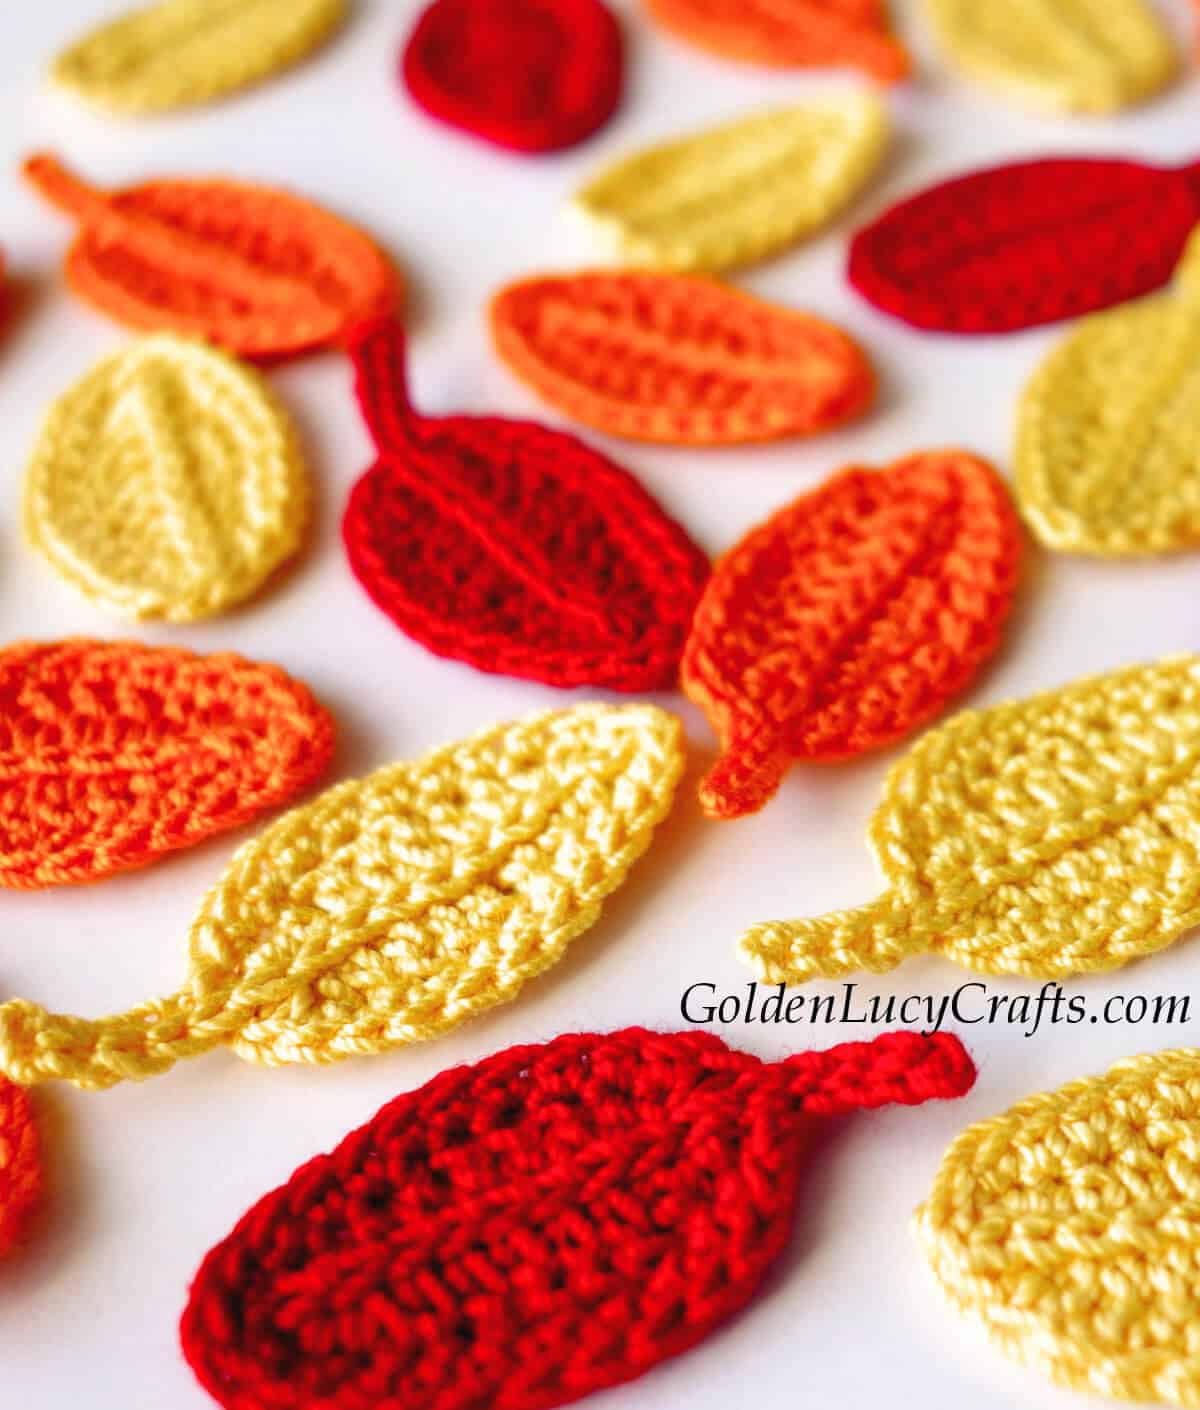 Crochet leaves in red, yellow and orange colors.